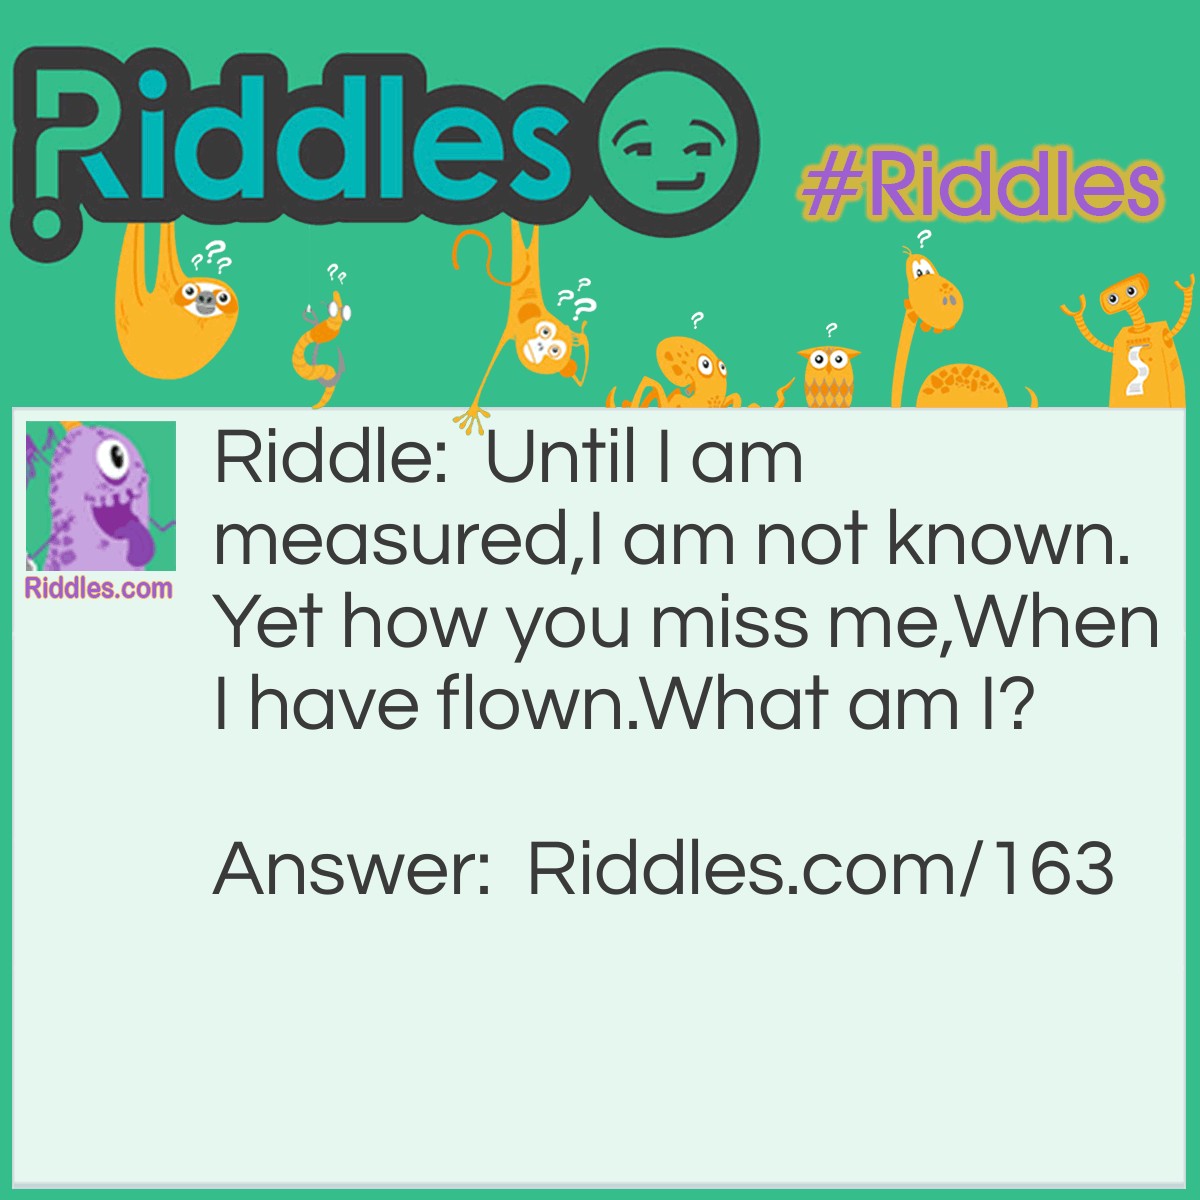 Riddle: Until I am measured, I am not known. Yet how you miss me, When I have flown. What am I? Answer: Time.